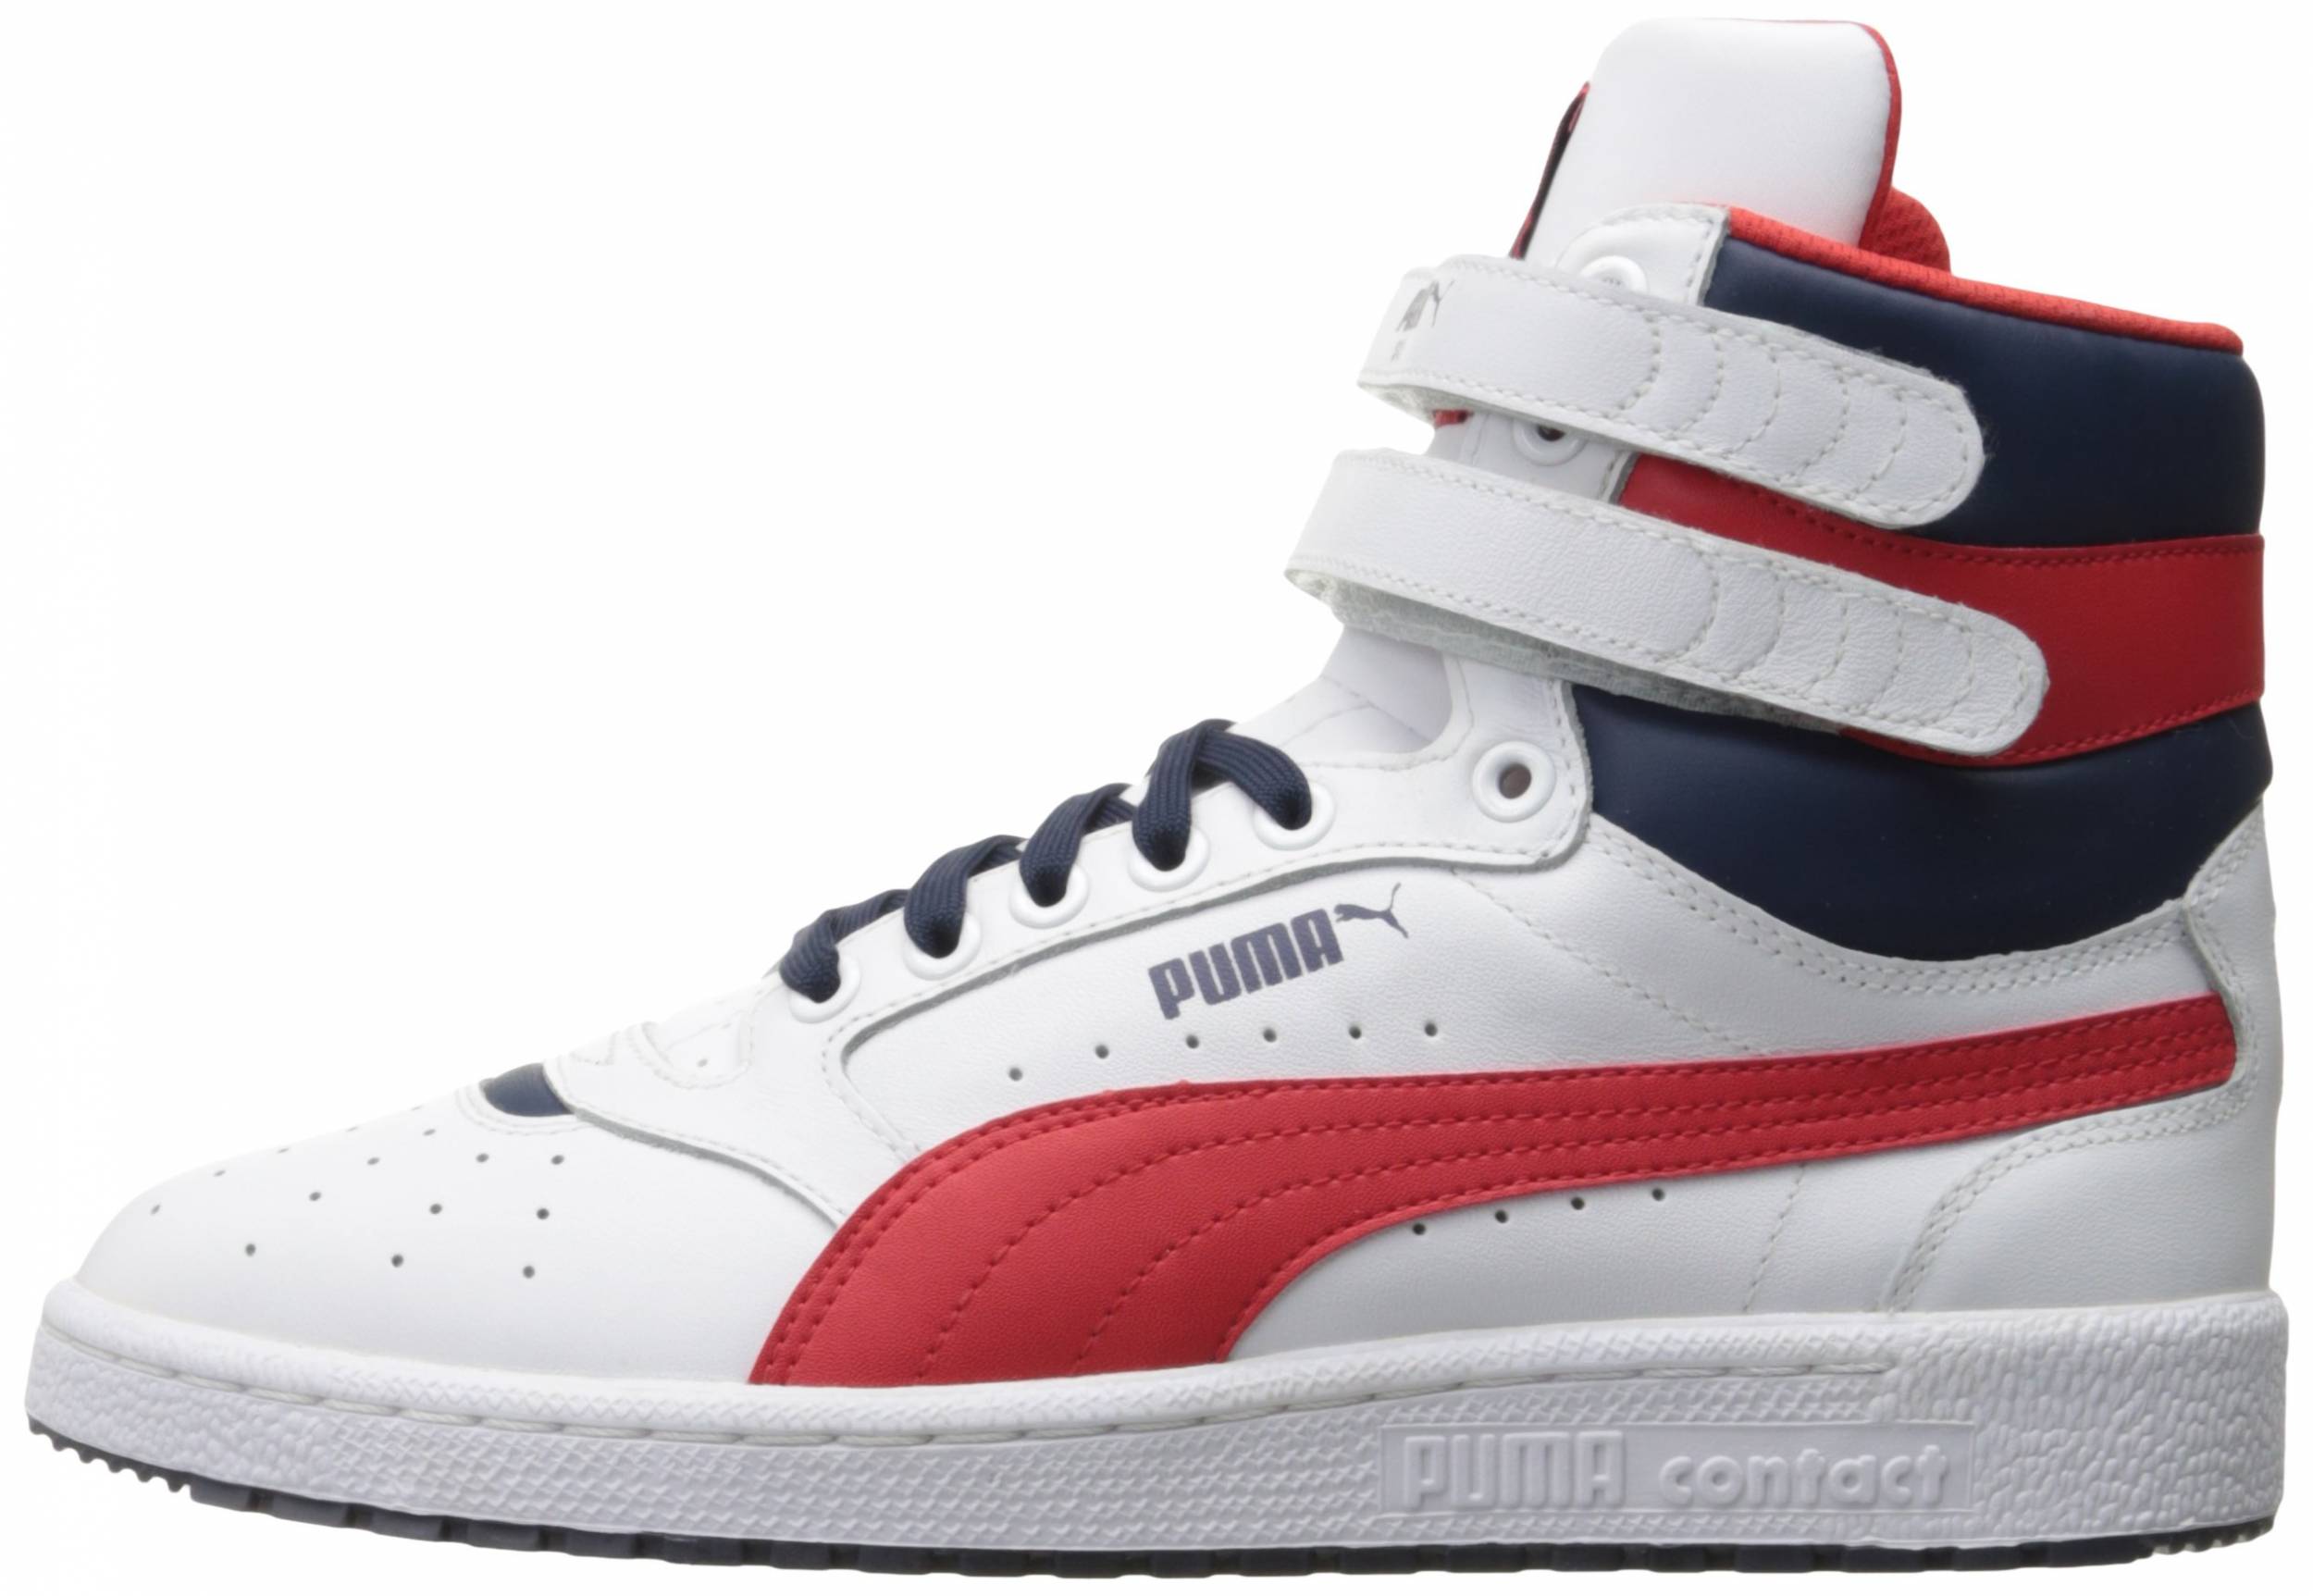 Save 36% on Puma High Top Sneakers (11 